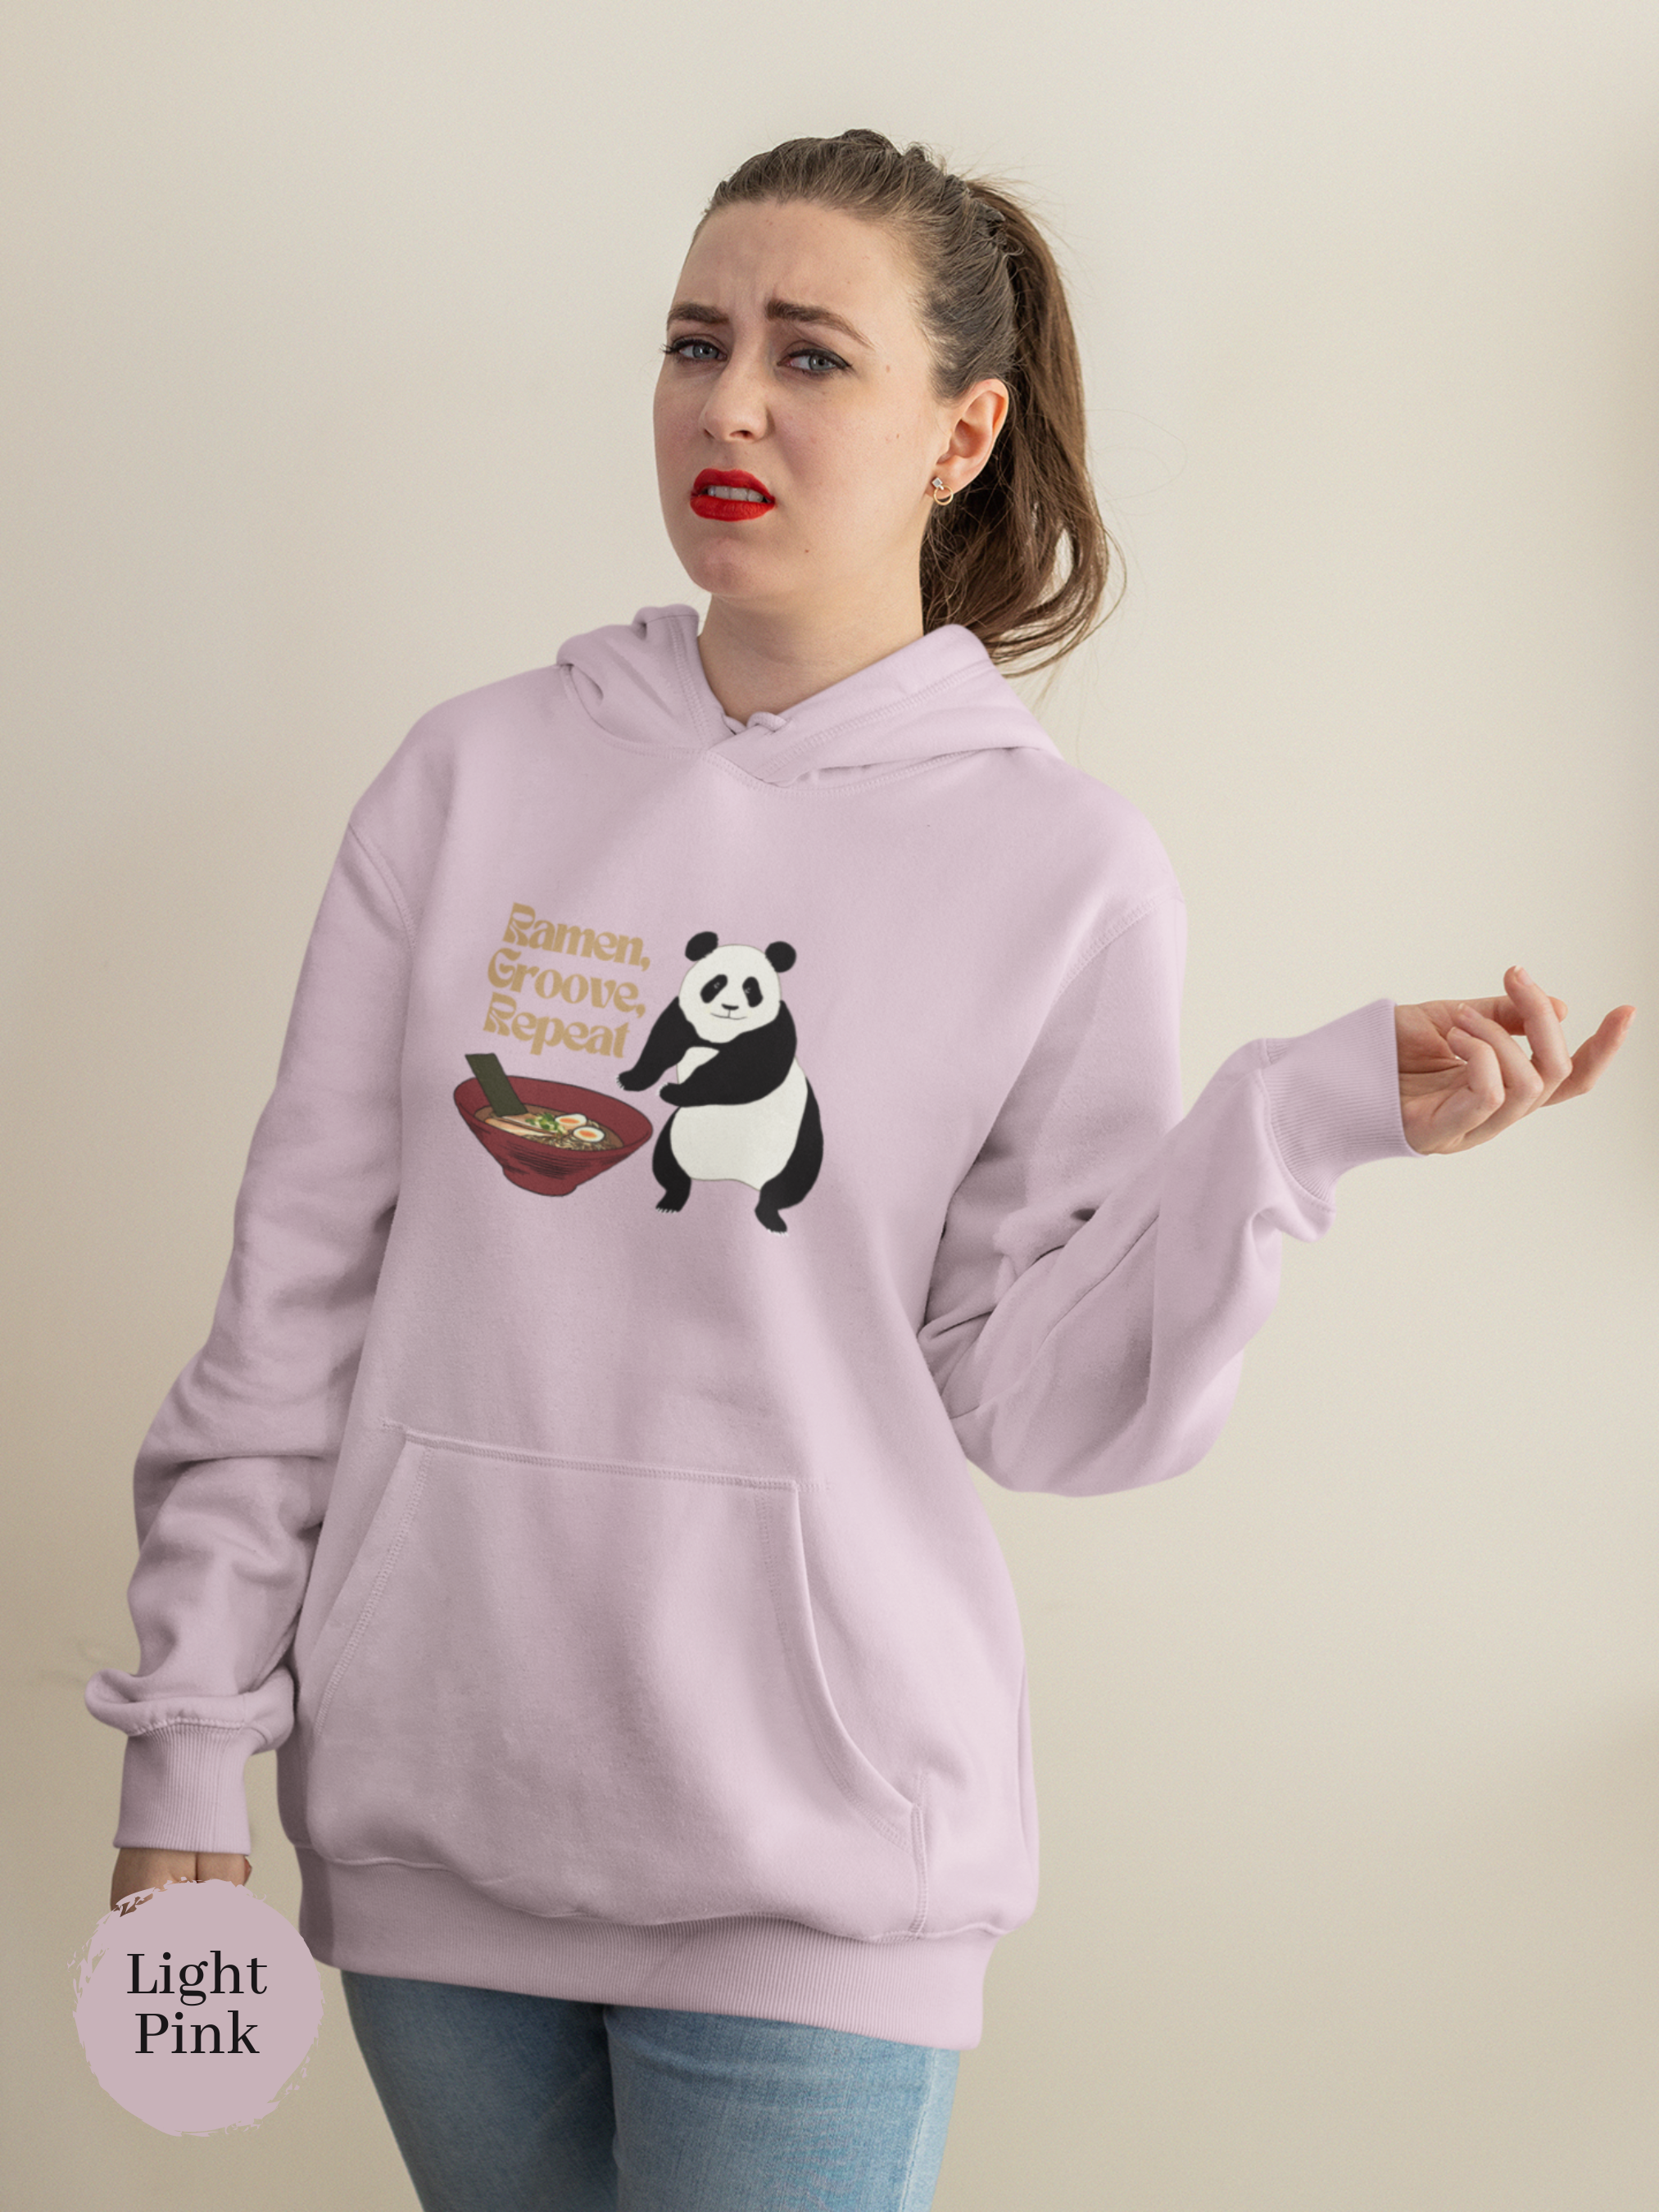 Ramen Hoodie - "Ramen, Groove, Repeat" featuring Pandas and Noodles - Perfect for Foodie Lovers and Asian Food Enthusiasts